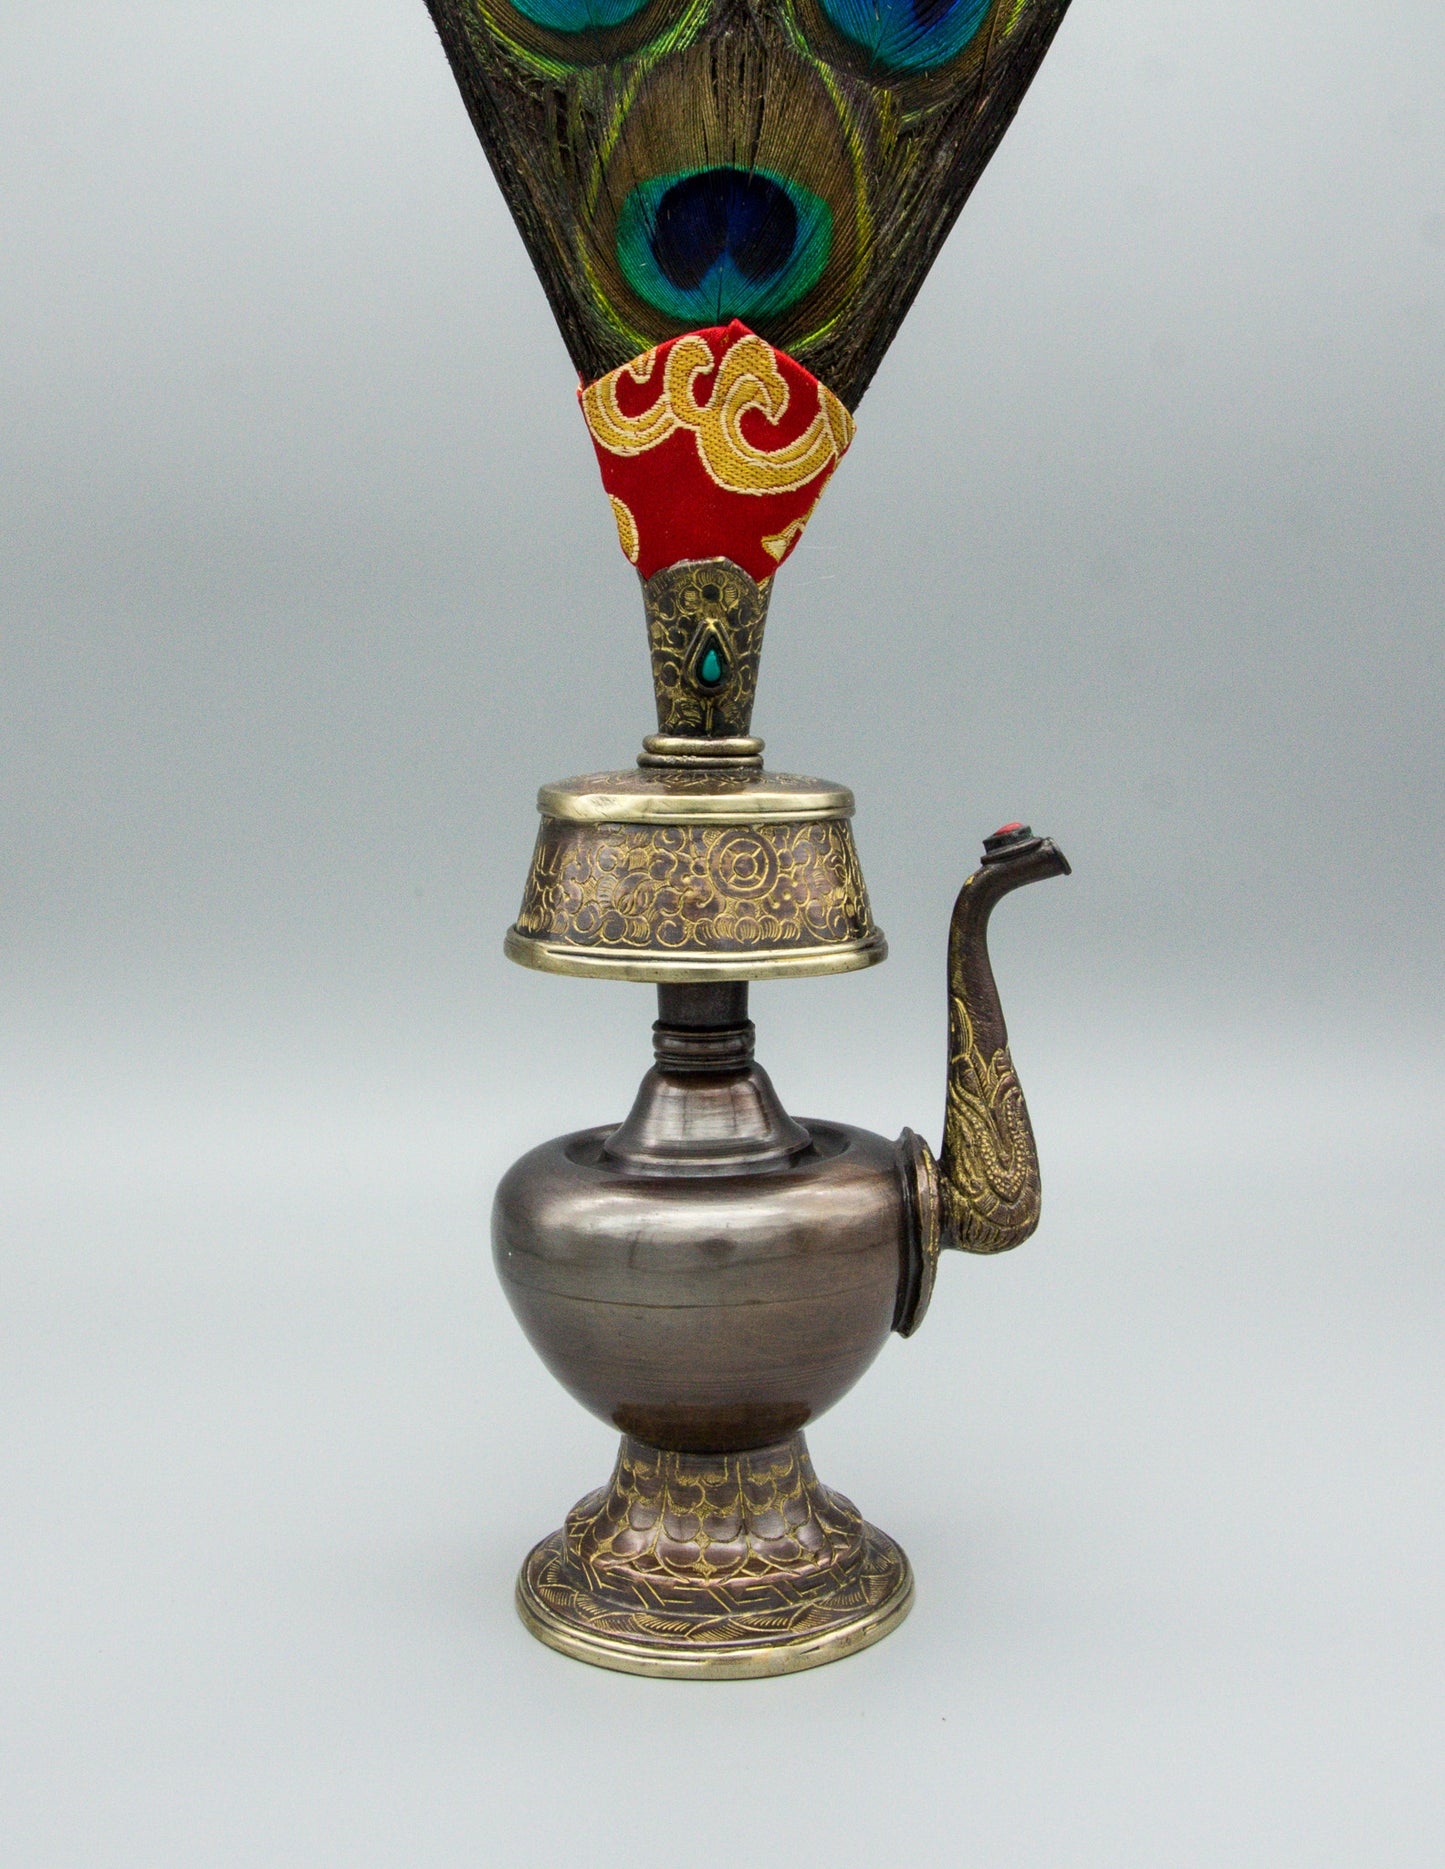 Engraved Bumpa Vase with Feathers